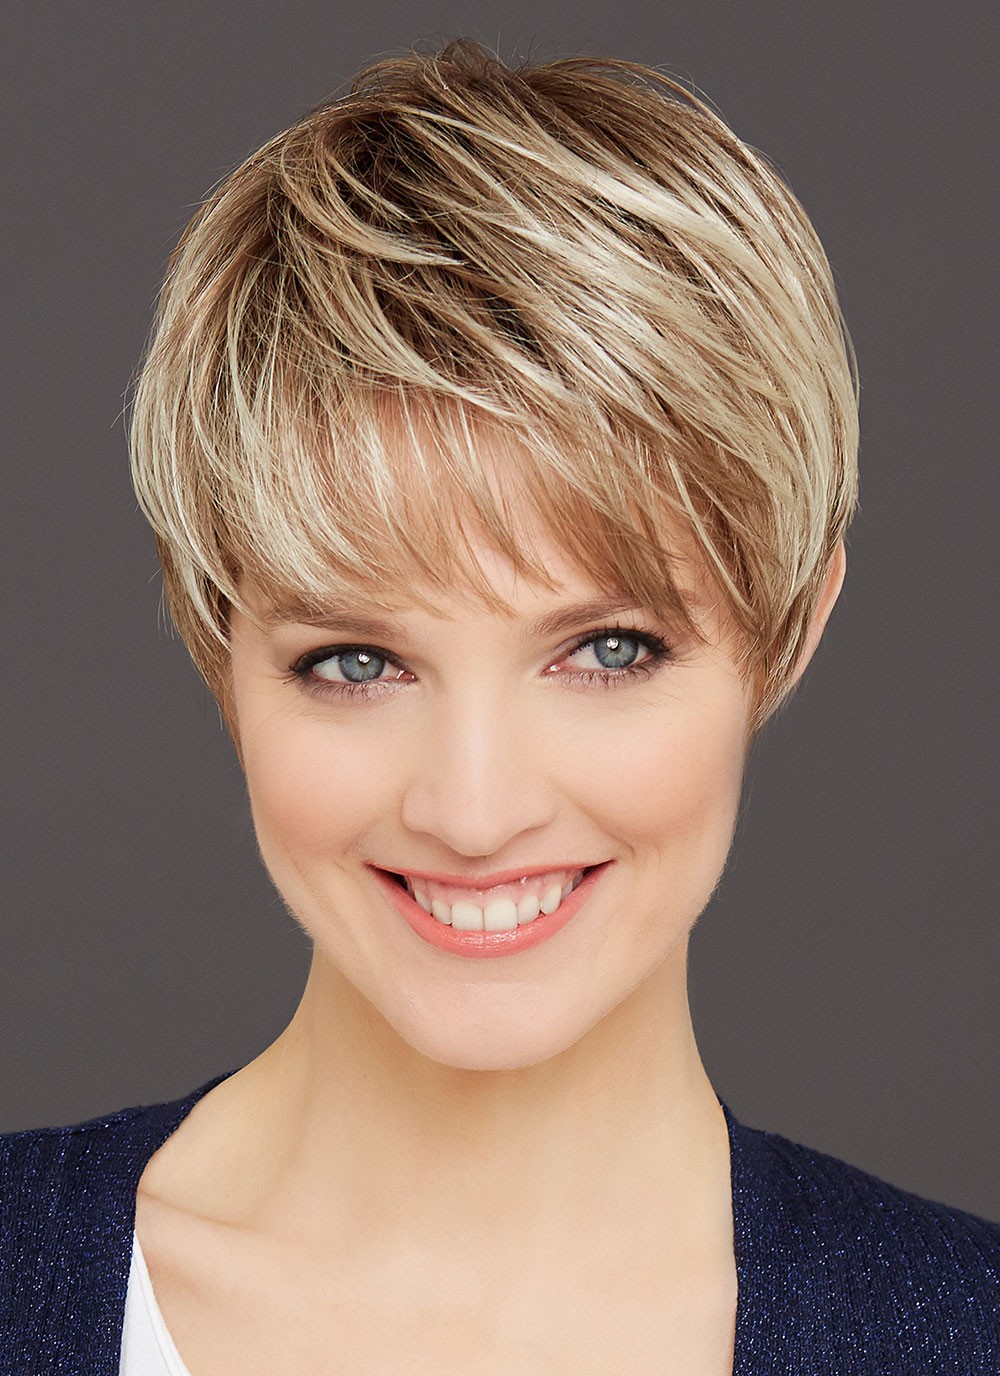 Hair Cutting Style For Female Short